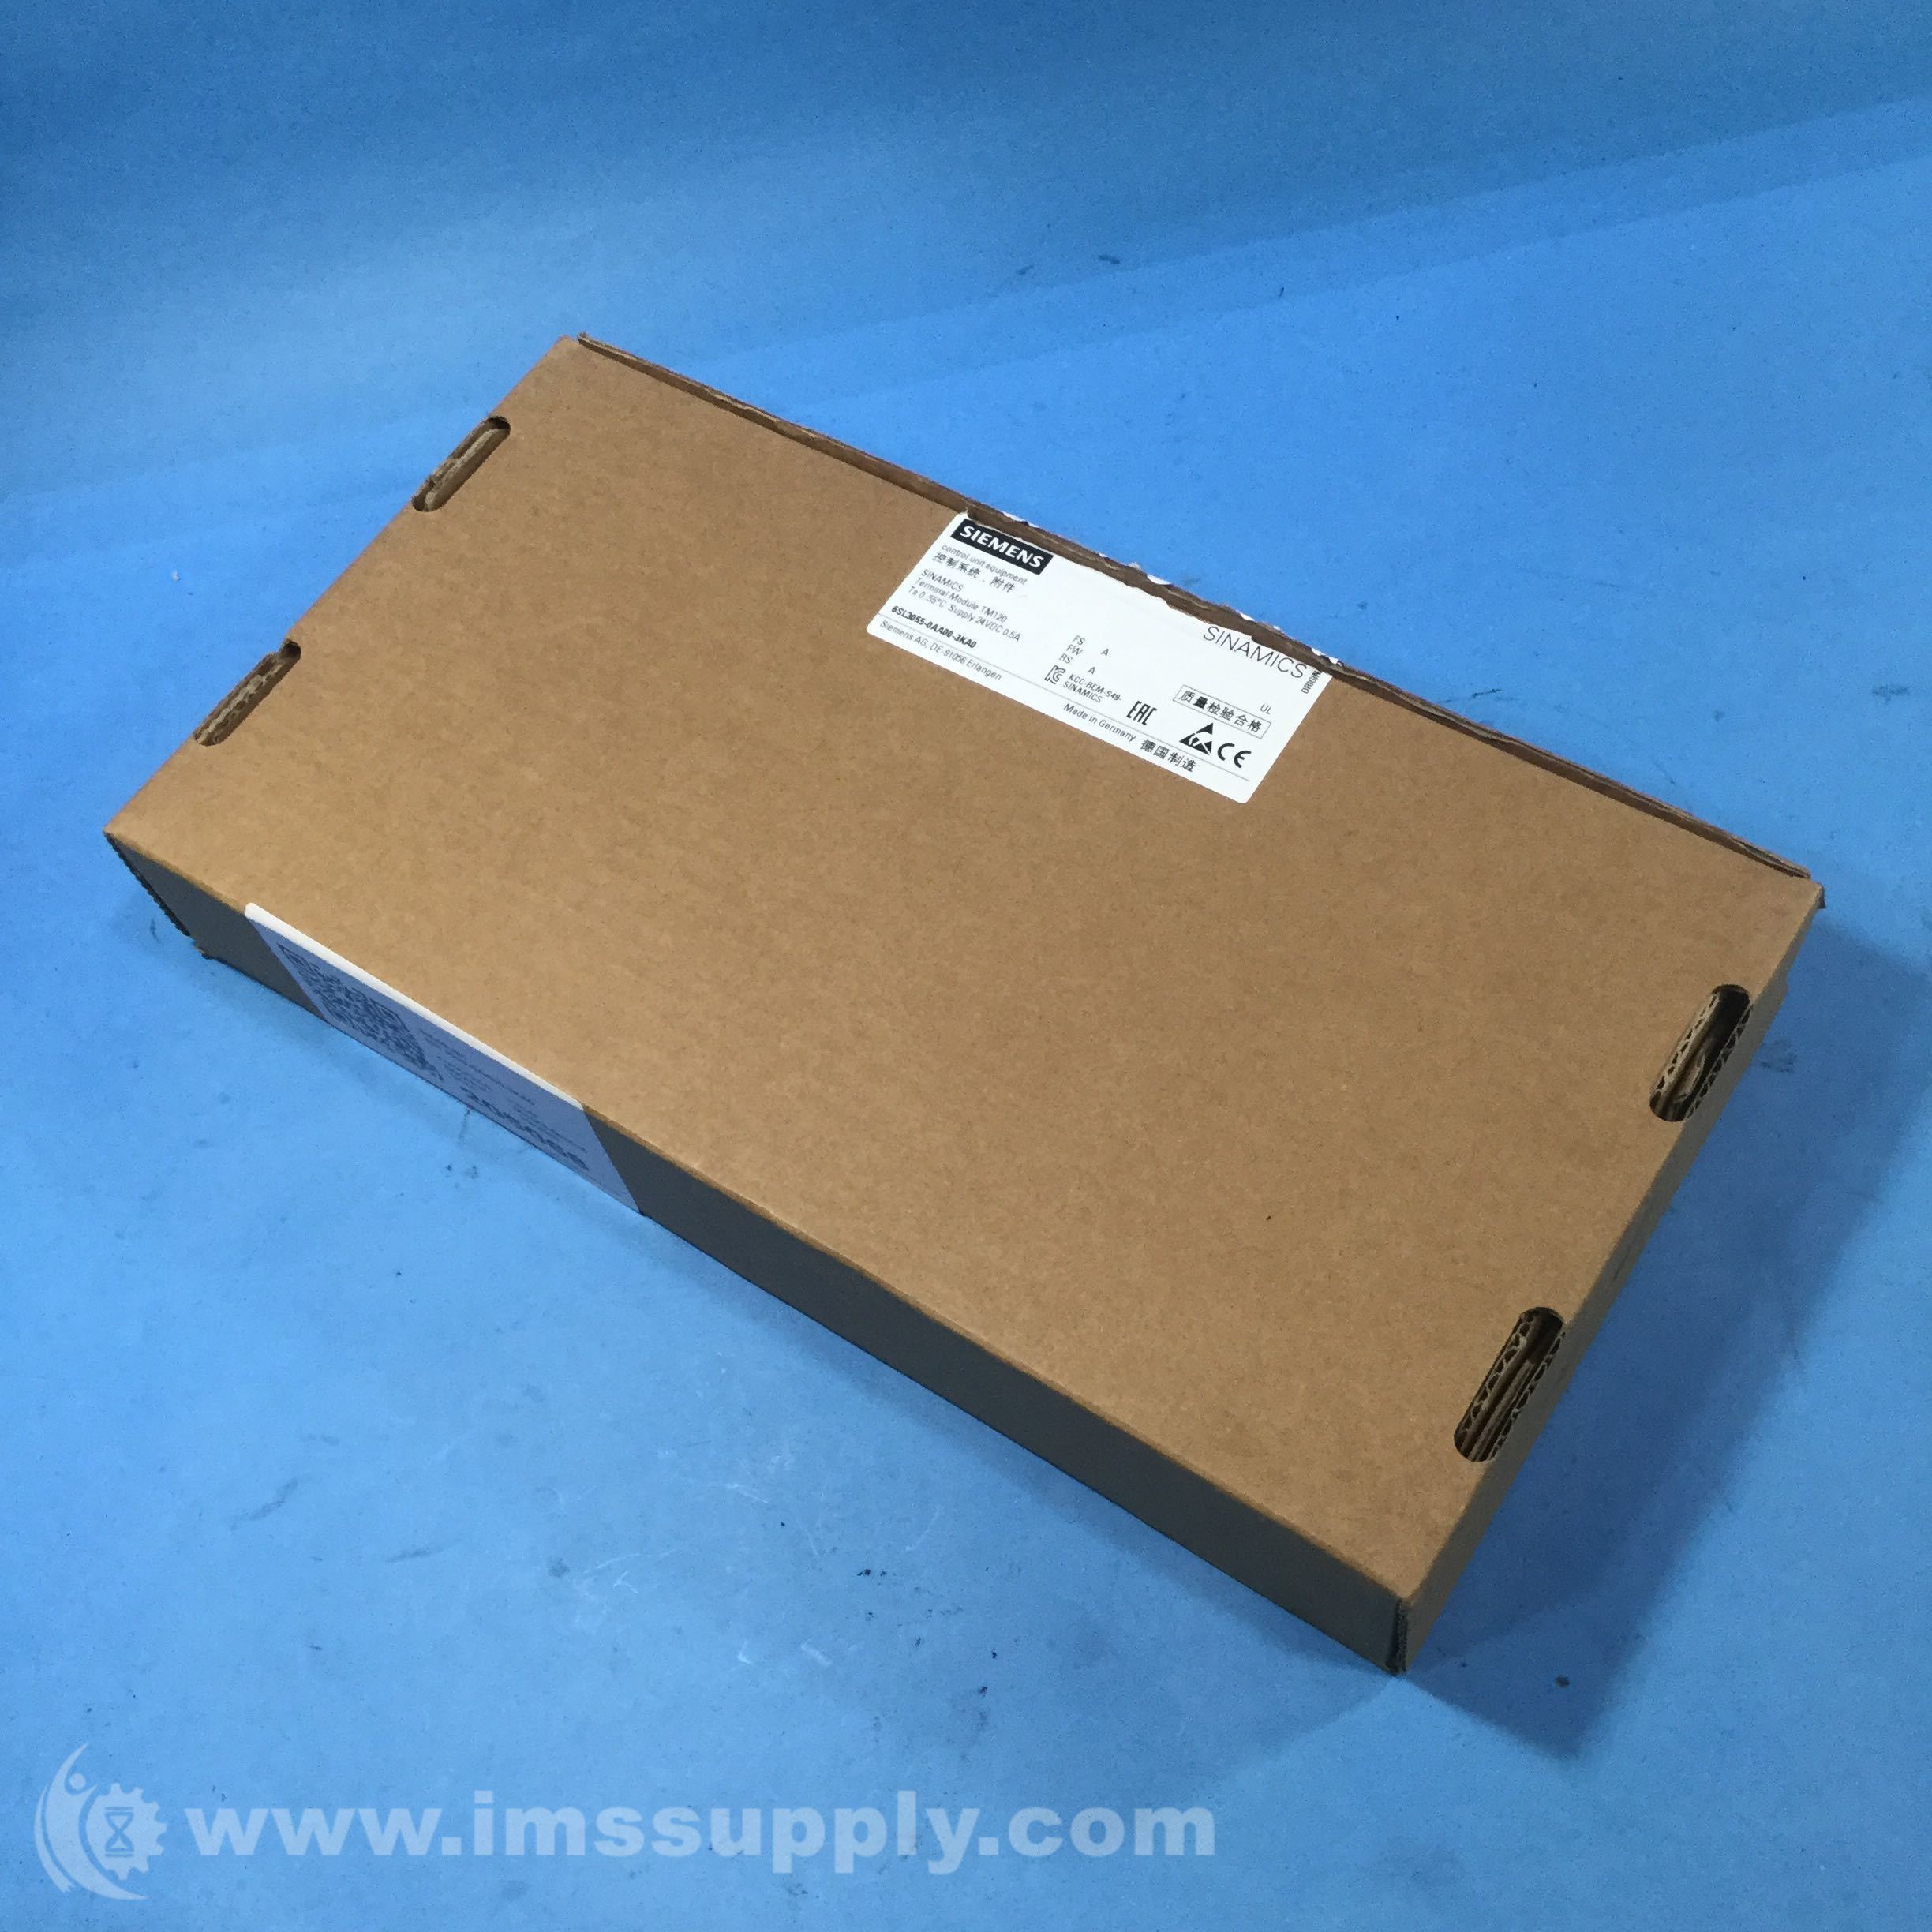 Details about   Reliance 0-52711,115V Input Card New in Box 